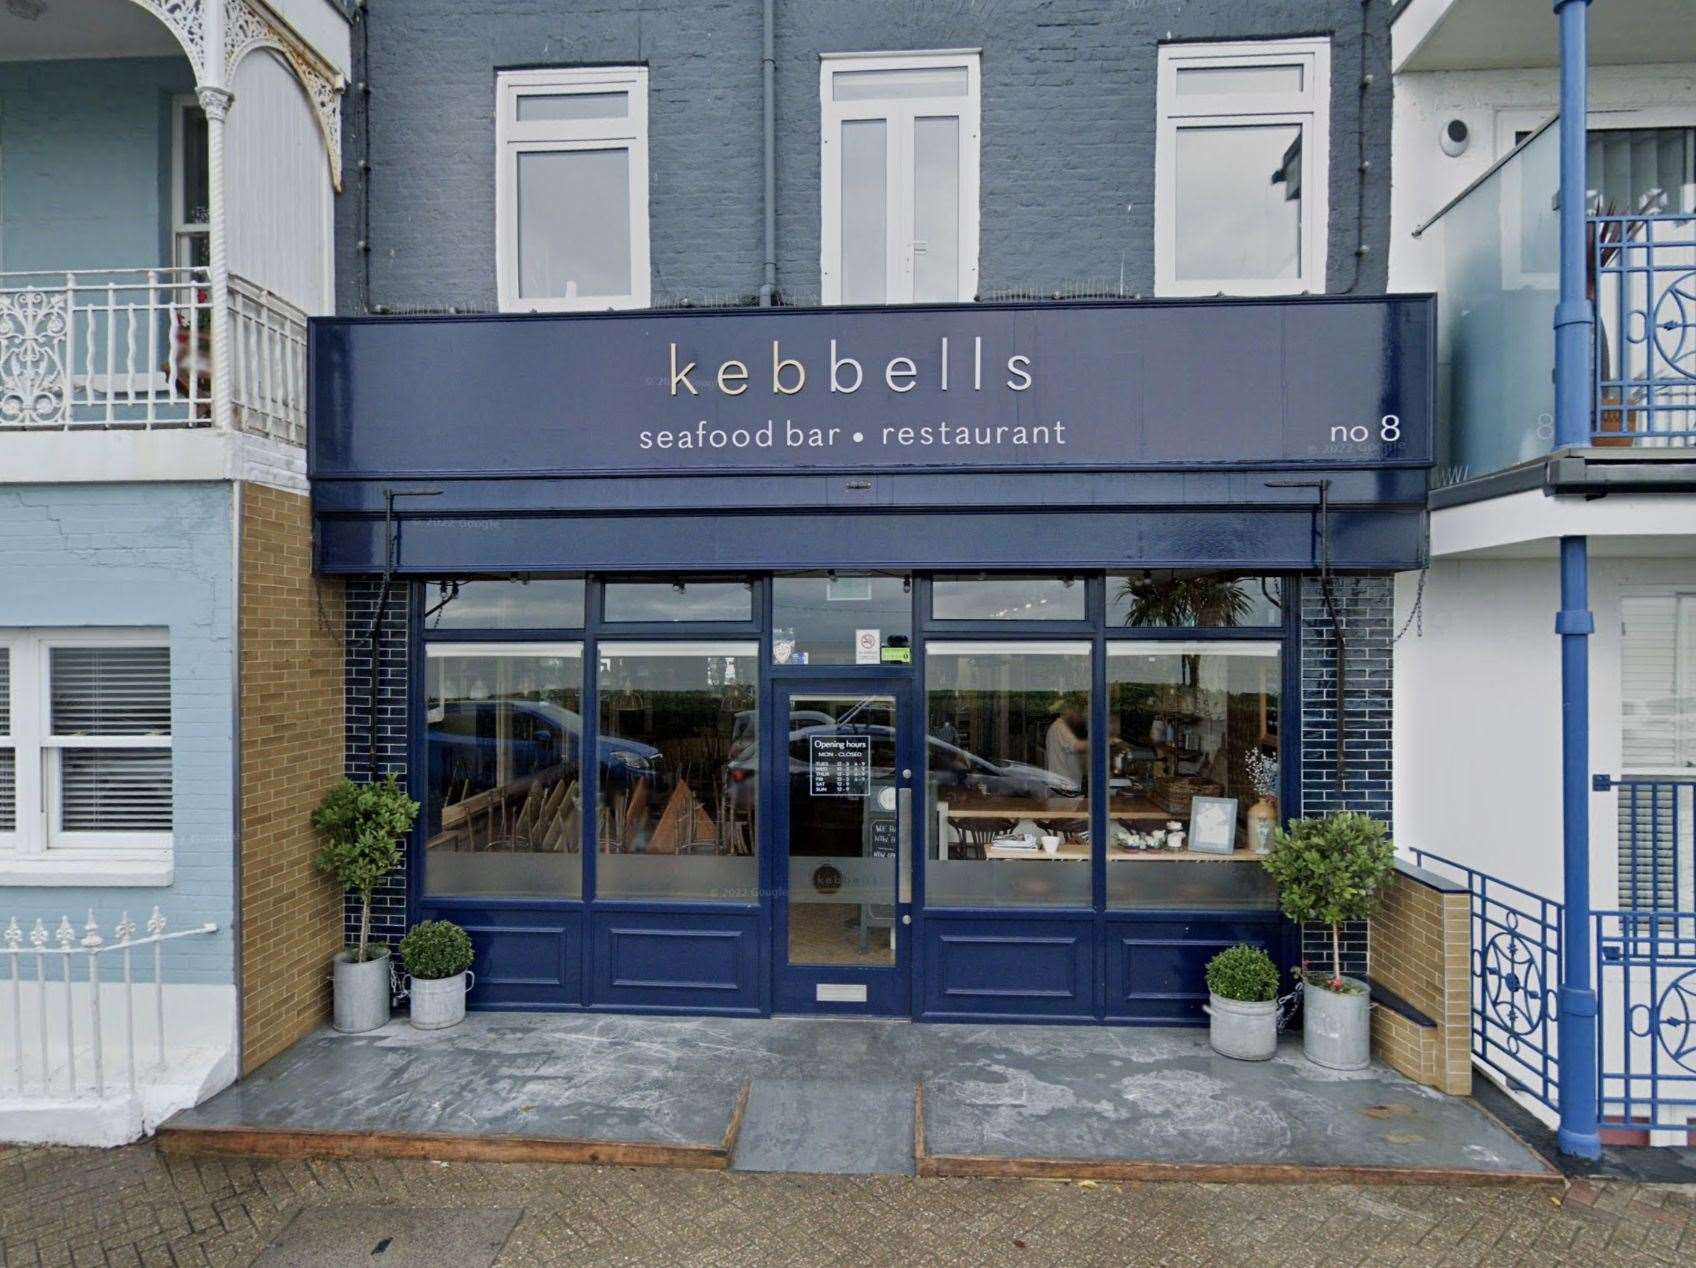 Kebbells seafood bar in Broadstairs is in the Michelin Guide